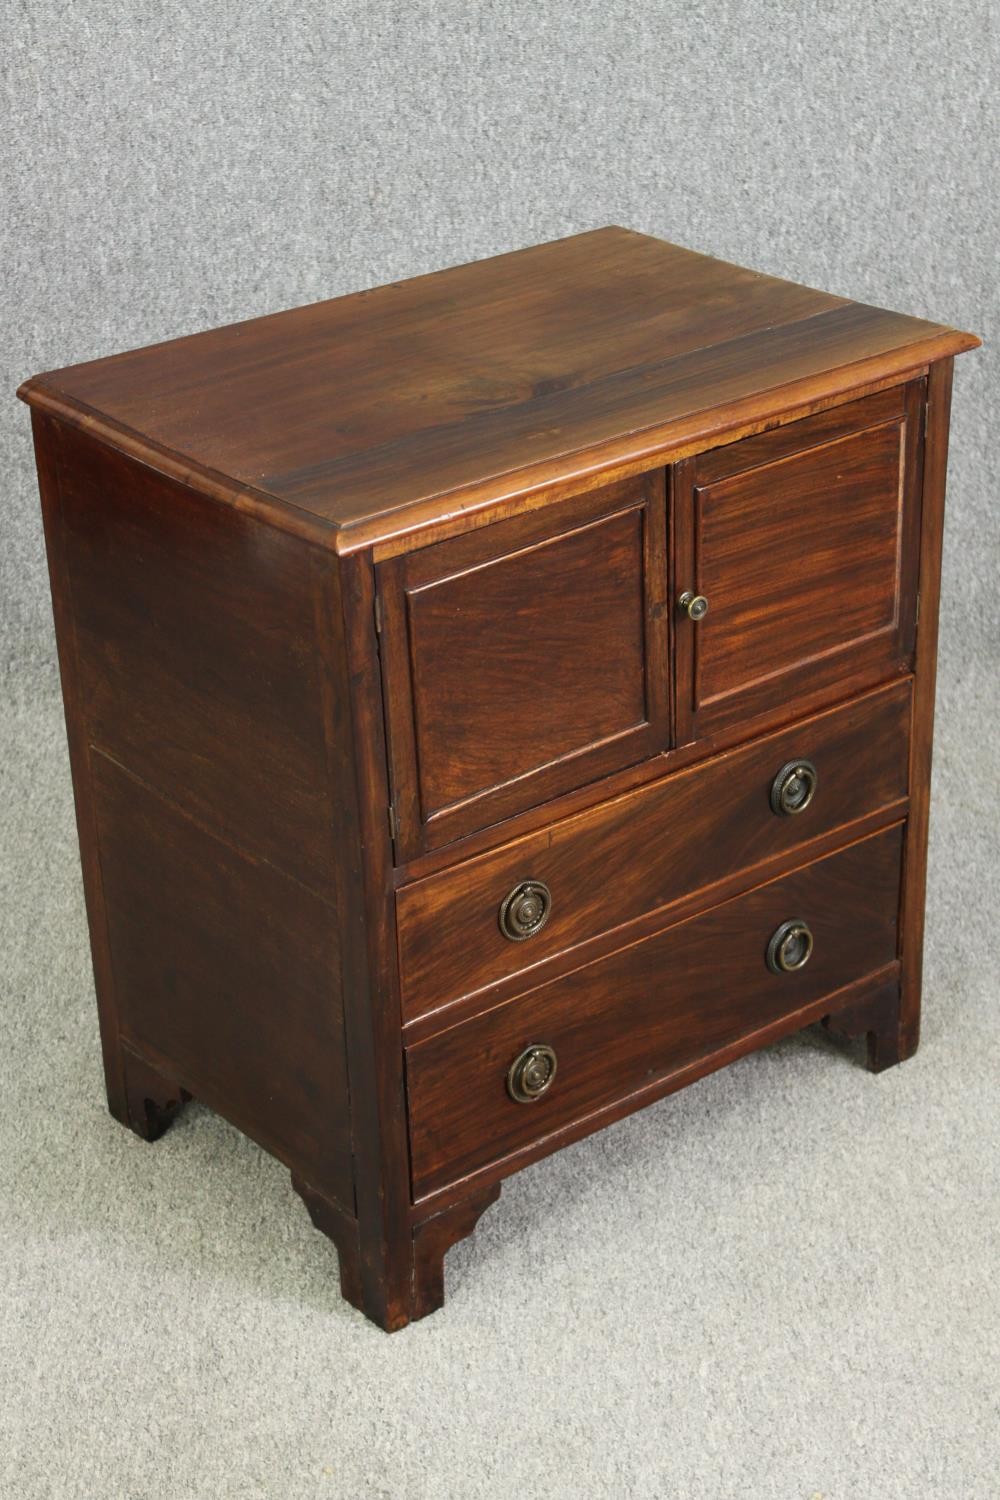 A George III style mahogany bedside cabinet, 19th century. H.72 W.66 D.44cm. - Image 2 of 6